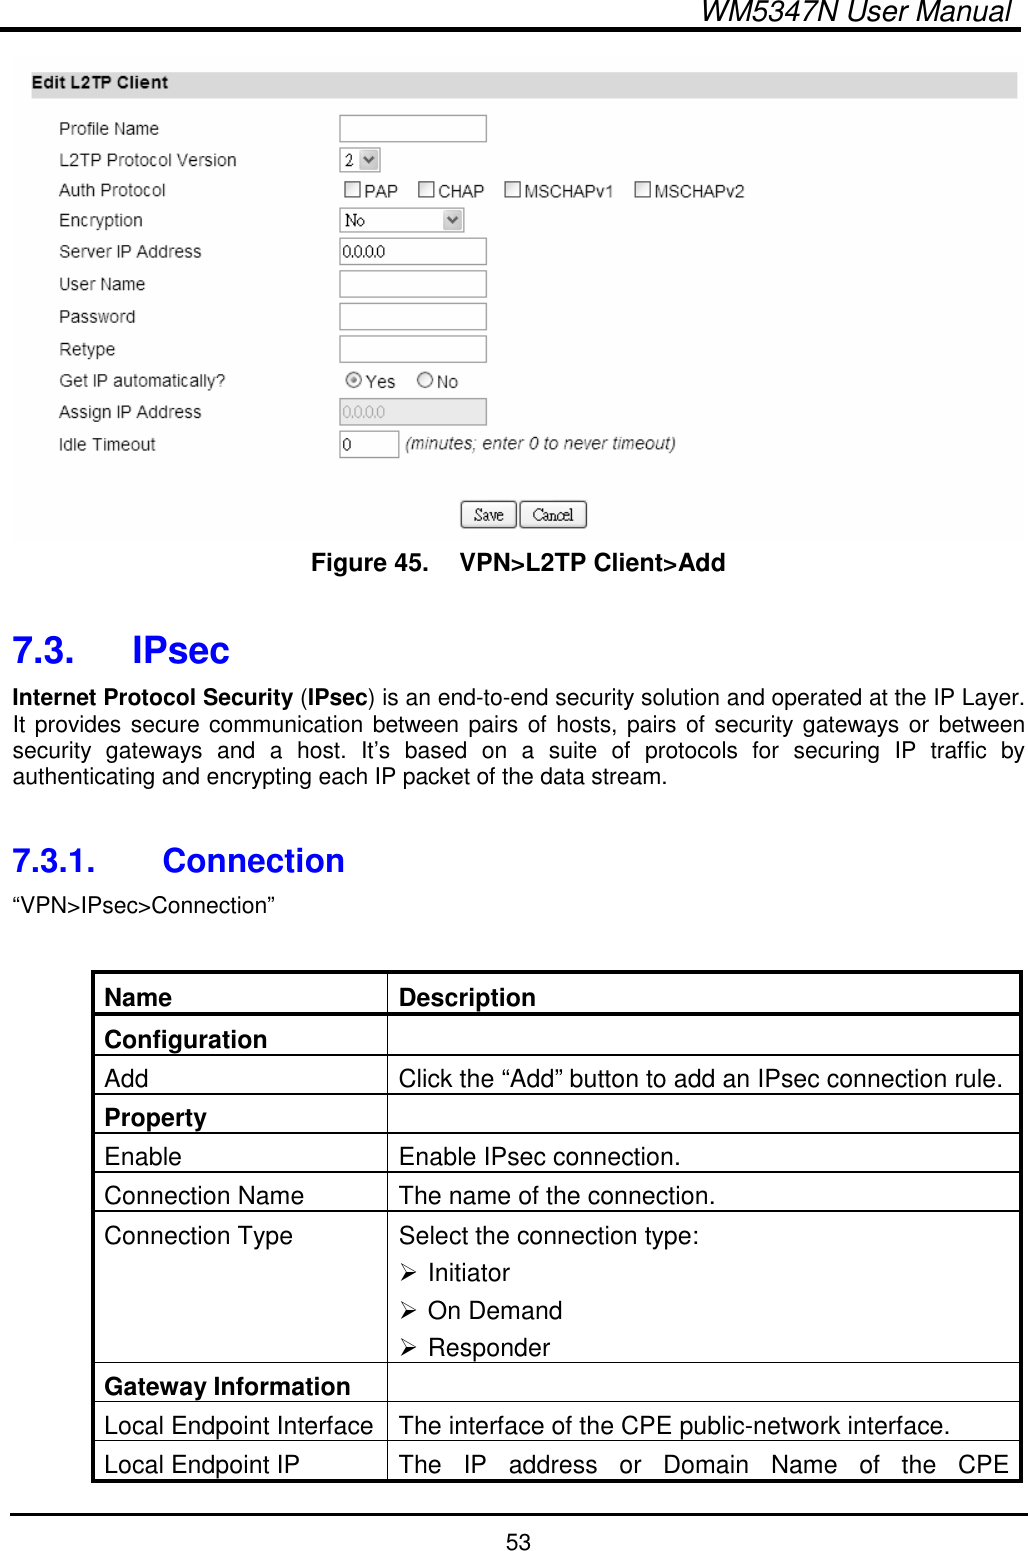  WM5347N User Manual  53  Figure 45.   VPN&gt;L2TP Client&gt;Add  7.3.  IPsec Internet Protocol Security (IPsec) is an end-to-end security solution and operated at the IP Layer. It provides secure communication between pairs of hosts, pairs of security gateways or between security  gateways  and  a  host.  It’s  based  on  a  suite  of  protocols  for  securing  IP  traffic  by authenticating and encrypting each IP packet of the data stream.  7.3.1.  Connection “VPN&gt;IPsec&gt;Connection”  Name  Description Configuration   Add  Click the “Add” button to add an IPsec connection rule. Property   Enable  Enable IPsec connection. Connection Name  The name of the connection. Connection Type  Select the connection type:  Initiator  On Demand  Responder Gateway Information   Local Endpoint Interface The interface of the CPE public-network interface. Local Endpoint IP  The  IP  address  or  Domain  Name  of  the  CPE 